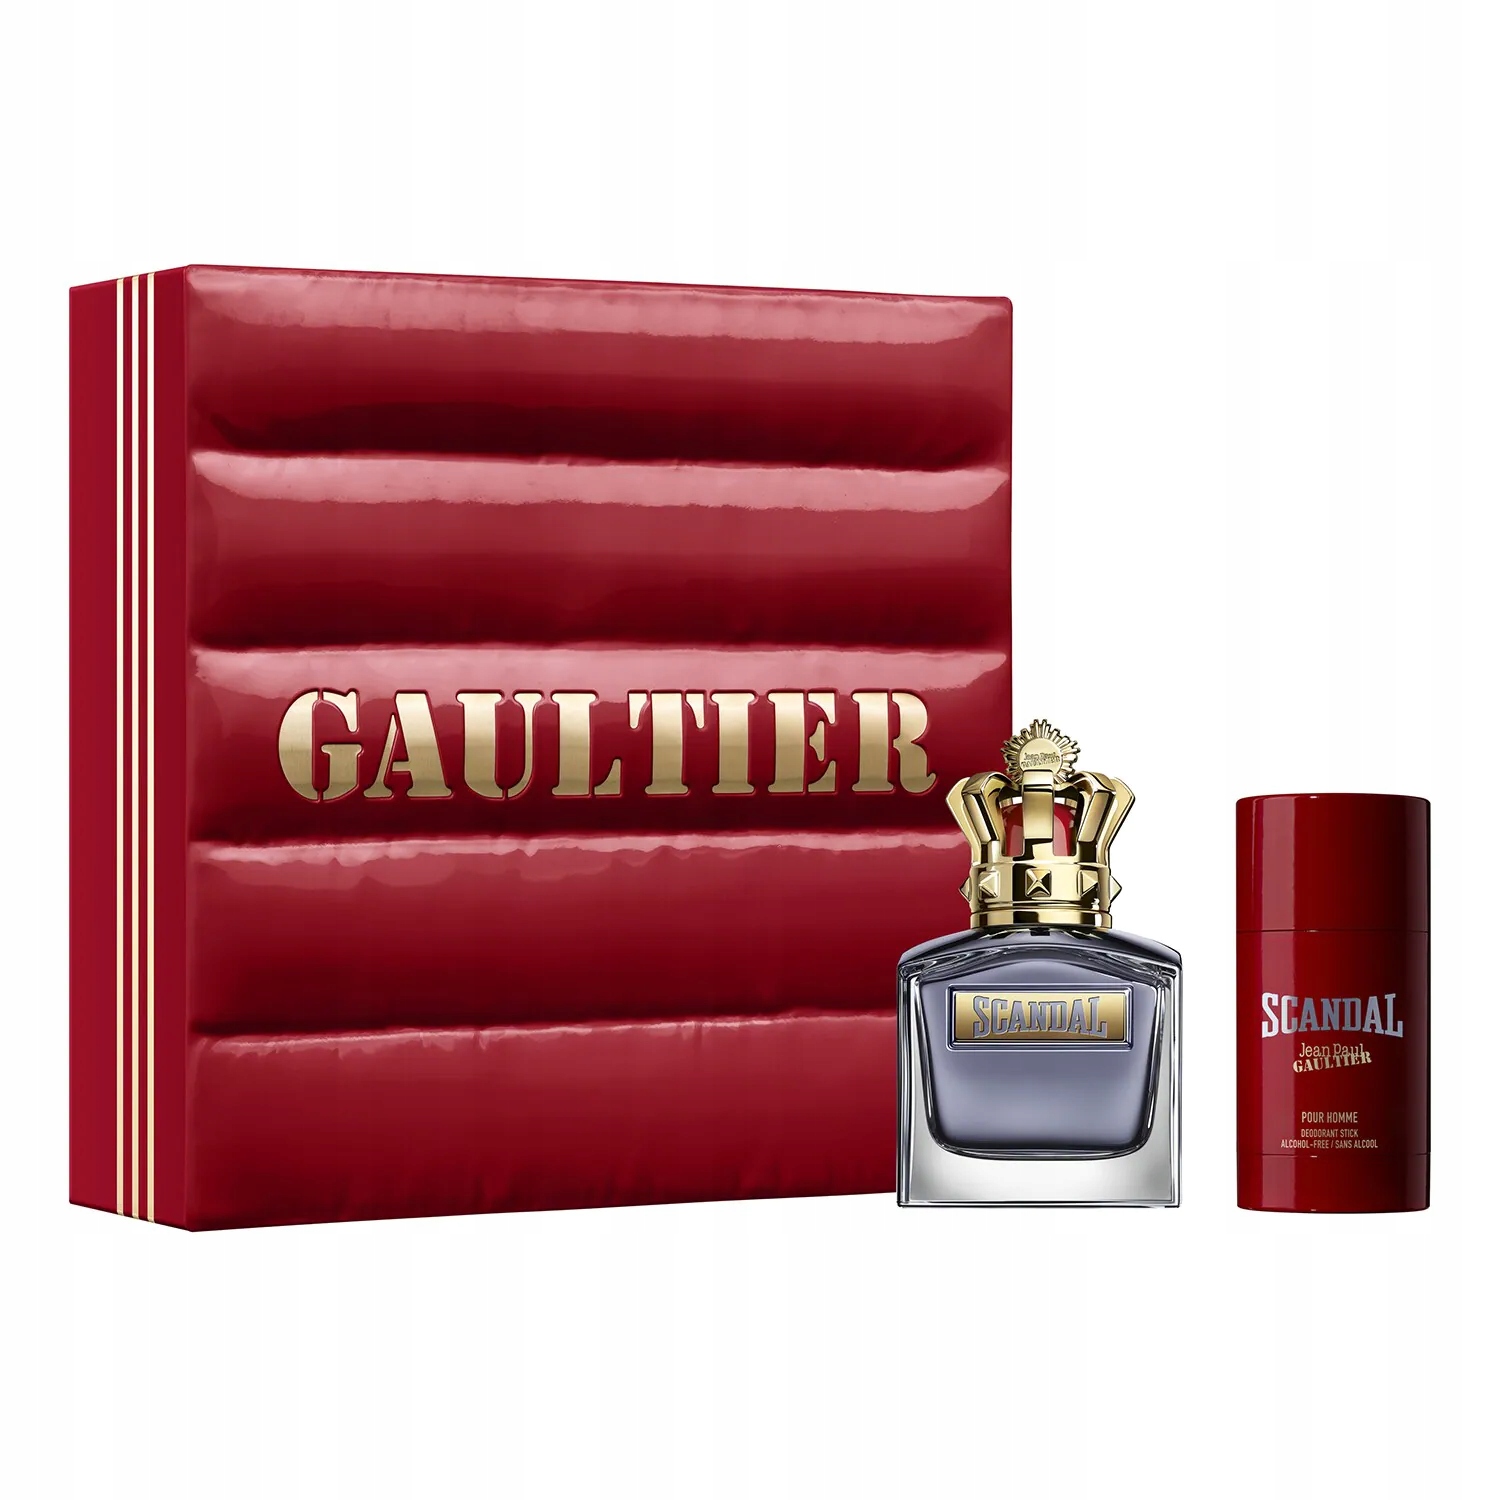 Gaultier scandal pour homme. Jean Paul Gaultier scandal pour homme 100 мл. Jean Paul Gaultier scandal pour homme. Jean Paul Gaultier scandal pour homme Black. Jean Paul Gaultier scandal le Parfum her.